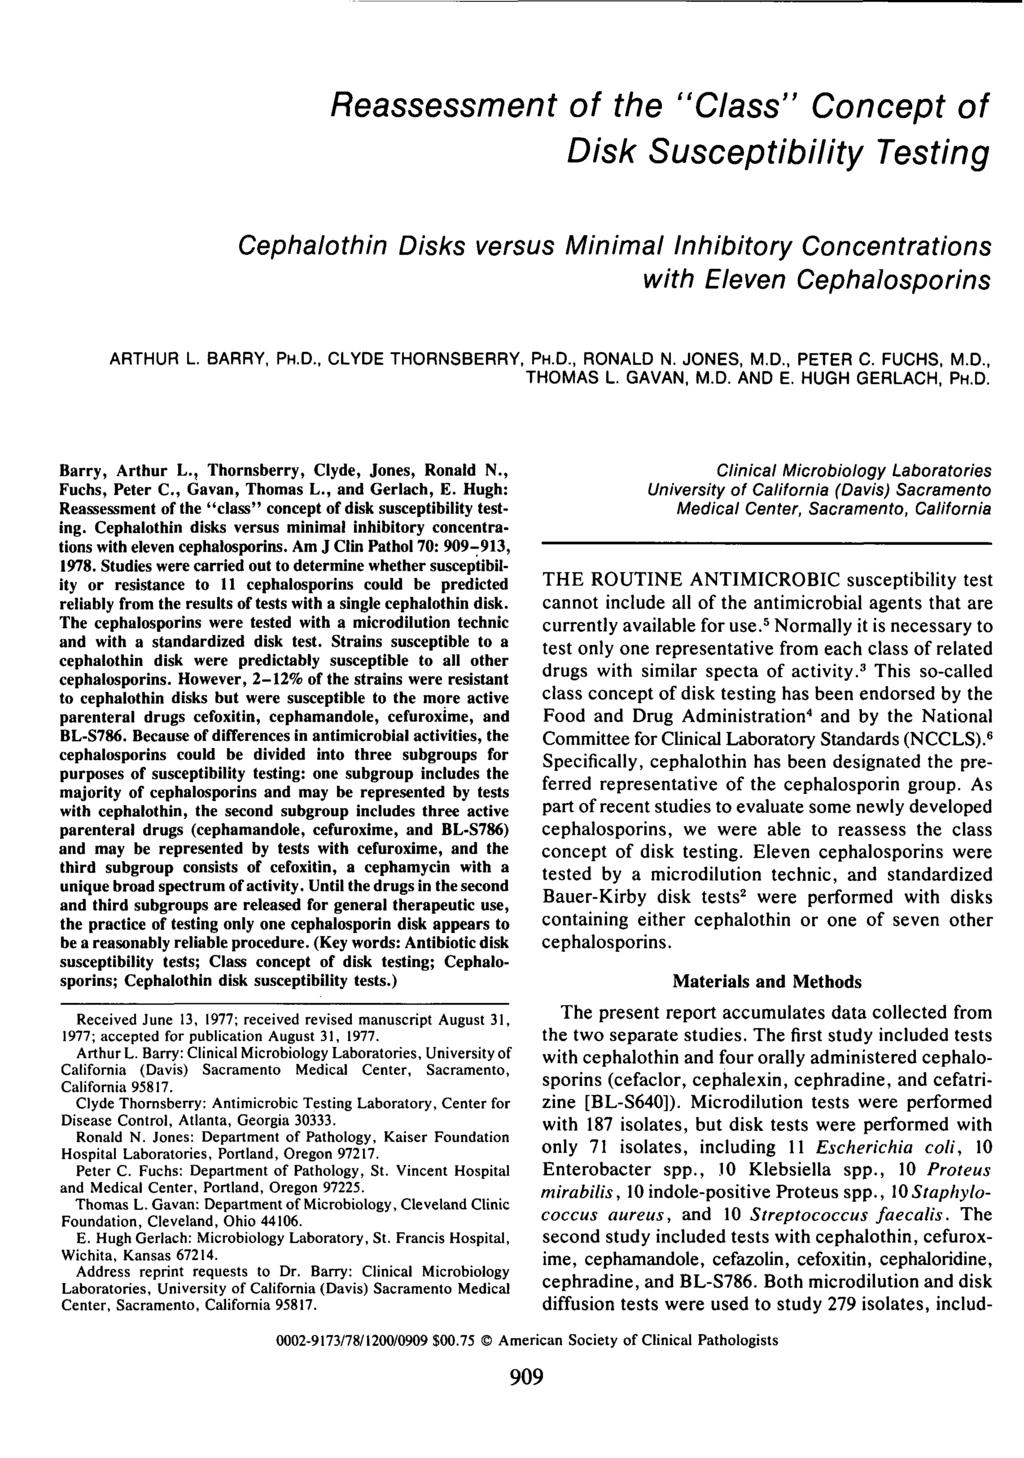 Reassessment of the "Class" Concept of Disk Susceptibility Testing Disks versus Minimal Inhibitory Concentrations with Eleven Cephalosporins ARTHUR L. BARRY, PH.D., CLYDE THORNSBERRY, PH.D., RONALD N.